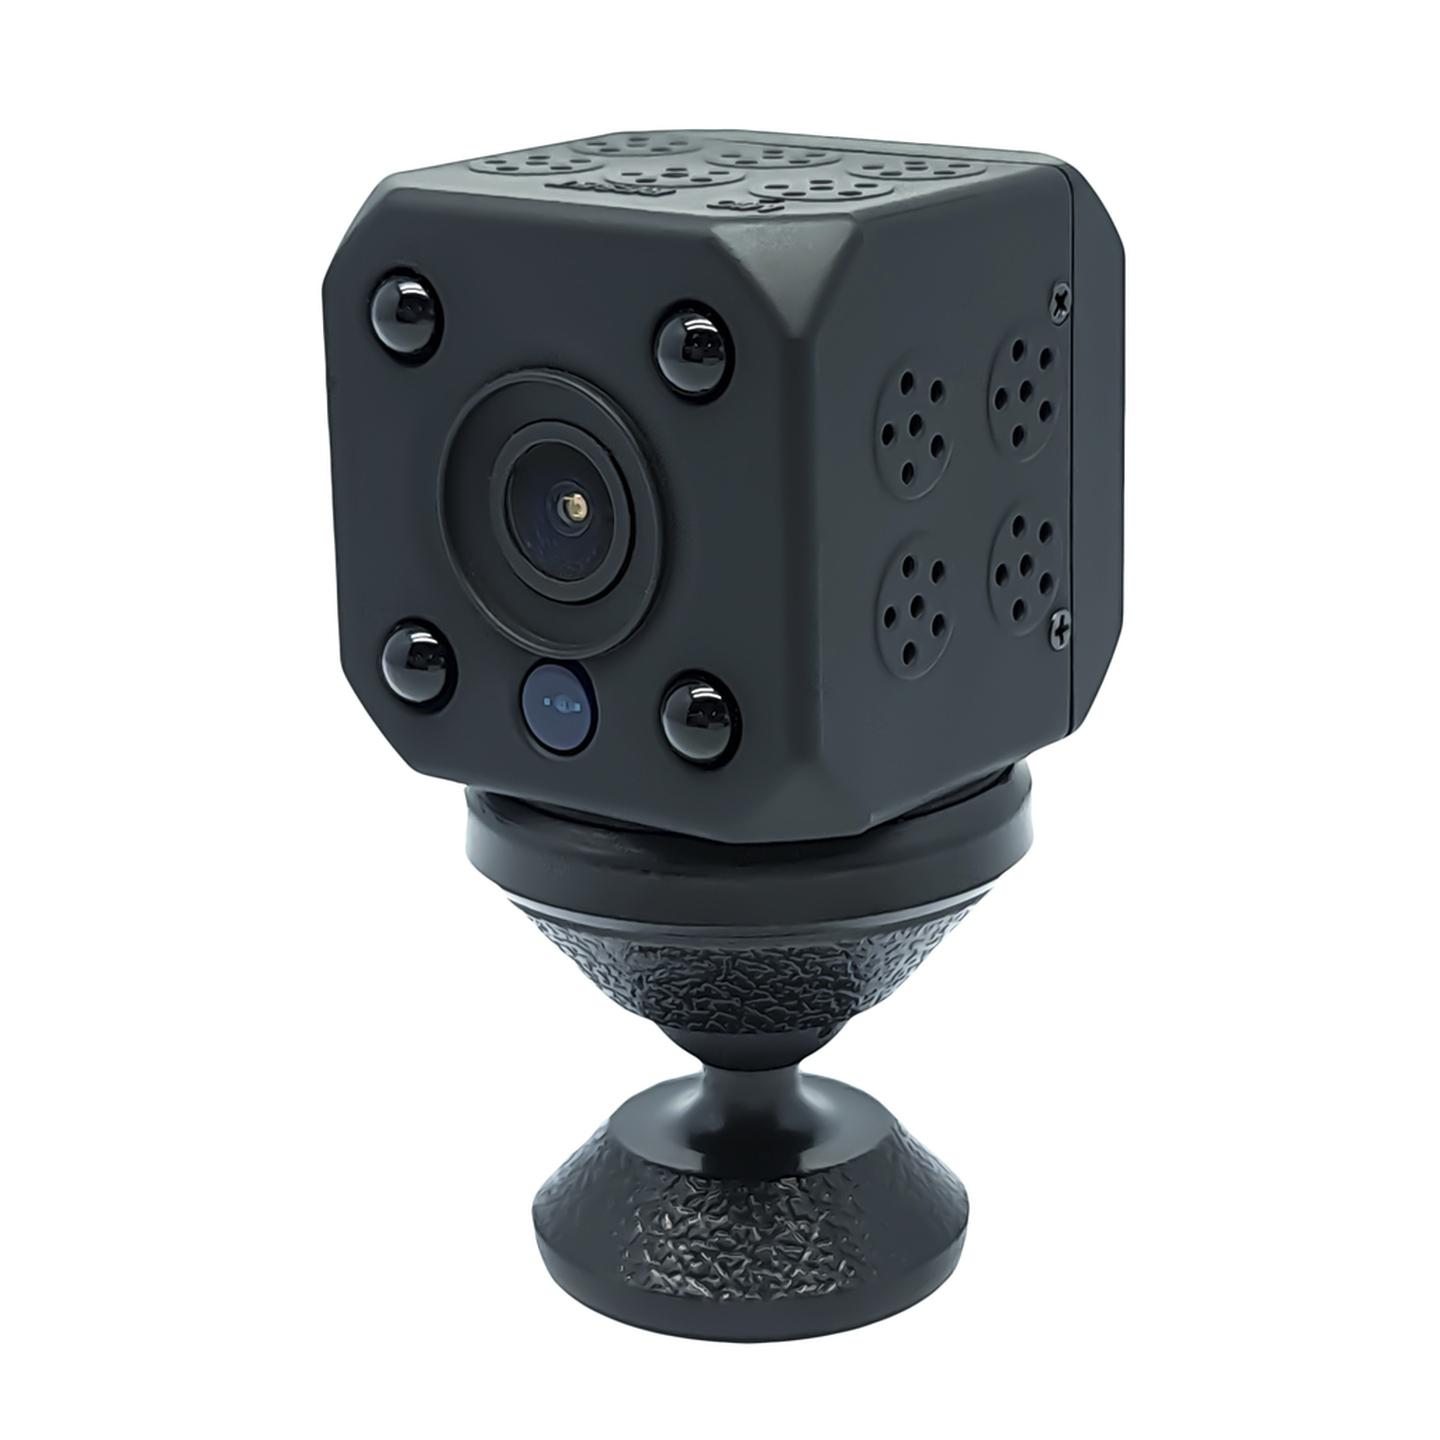 Miniature 1080p WiFi IP Camera with Rechargeable Battery and IR LEDs for night vision